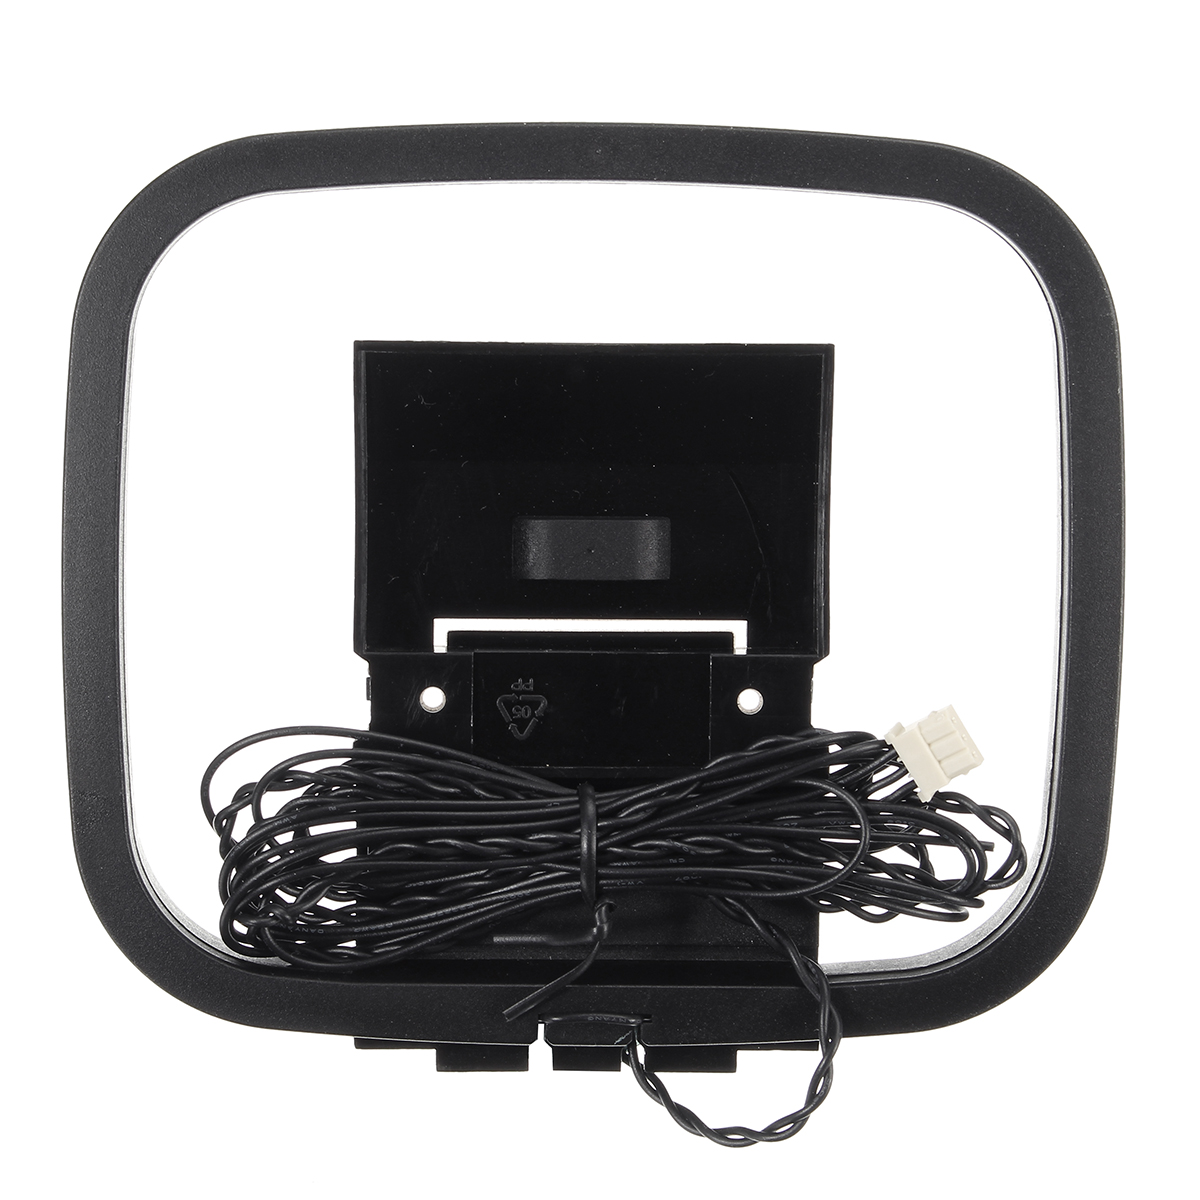 AM-3P-AM-FM-Loop-Antenna-With-3-pin-Mini-Connector-For-Home-Audio-Theater-Systems-Amplifier-1290066-2